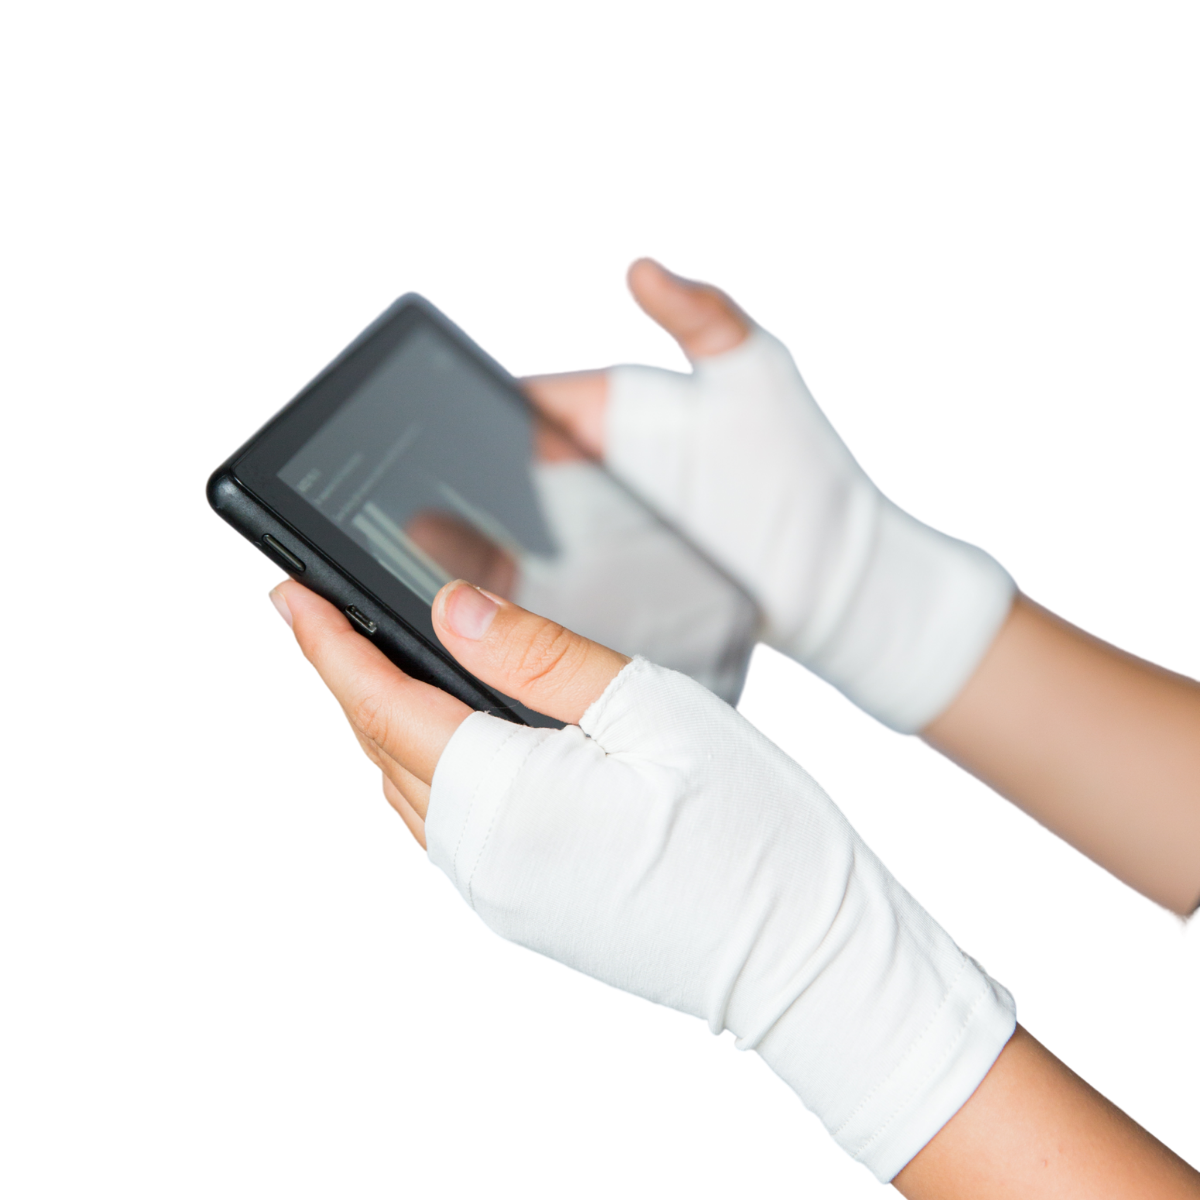 Two hands wearing white Remedywear fingerless gloves for eczema while playing with a tablet.